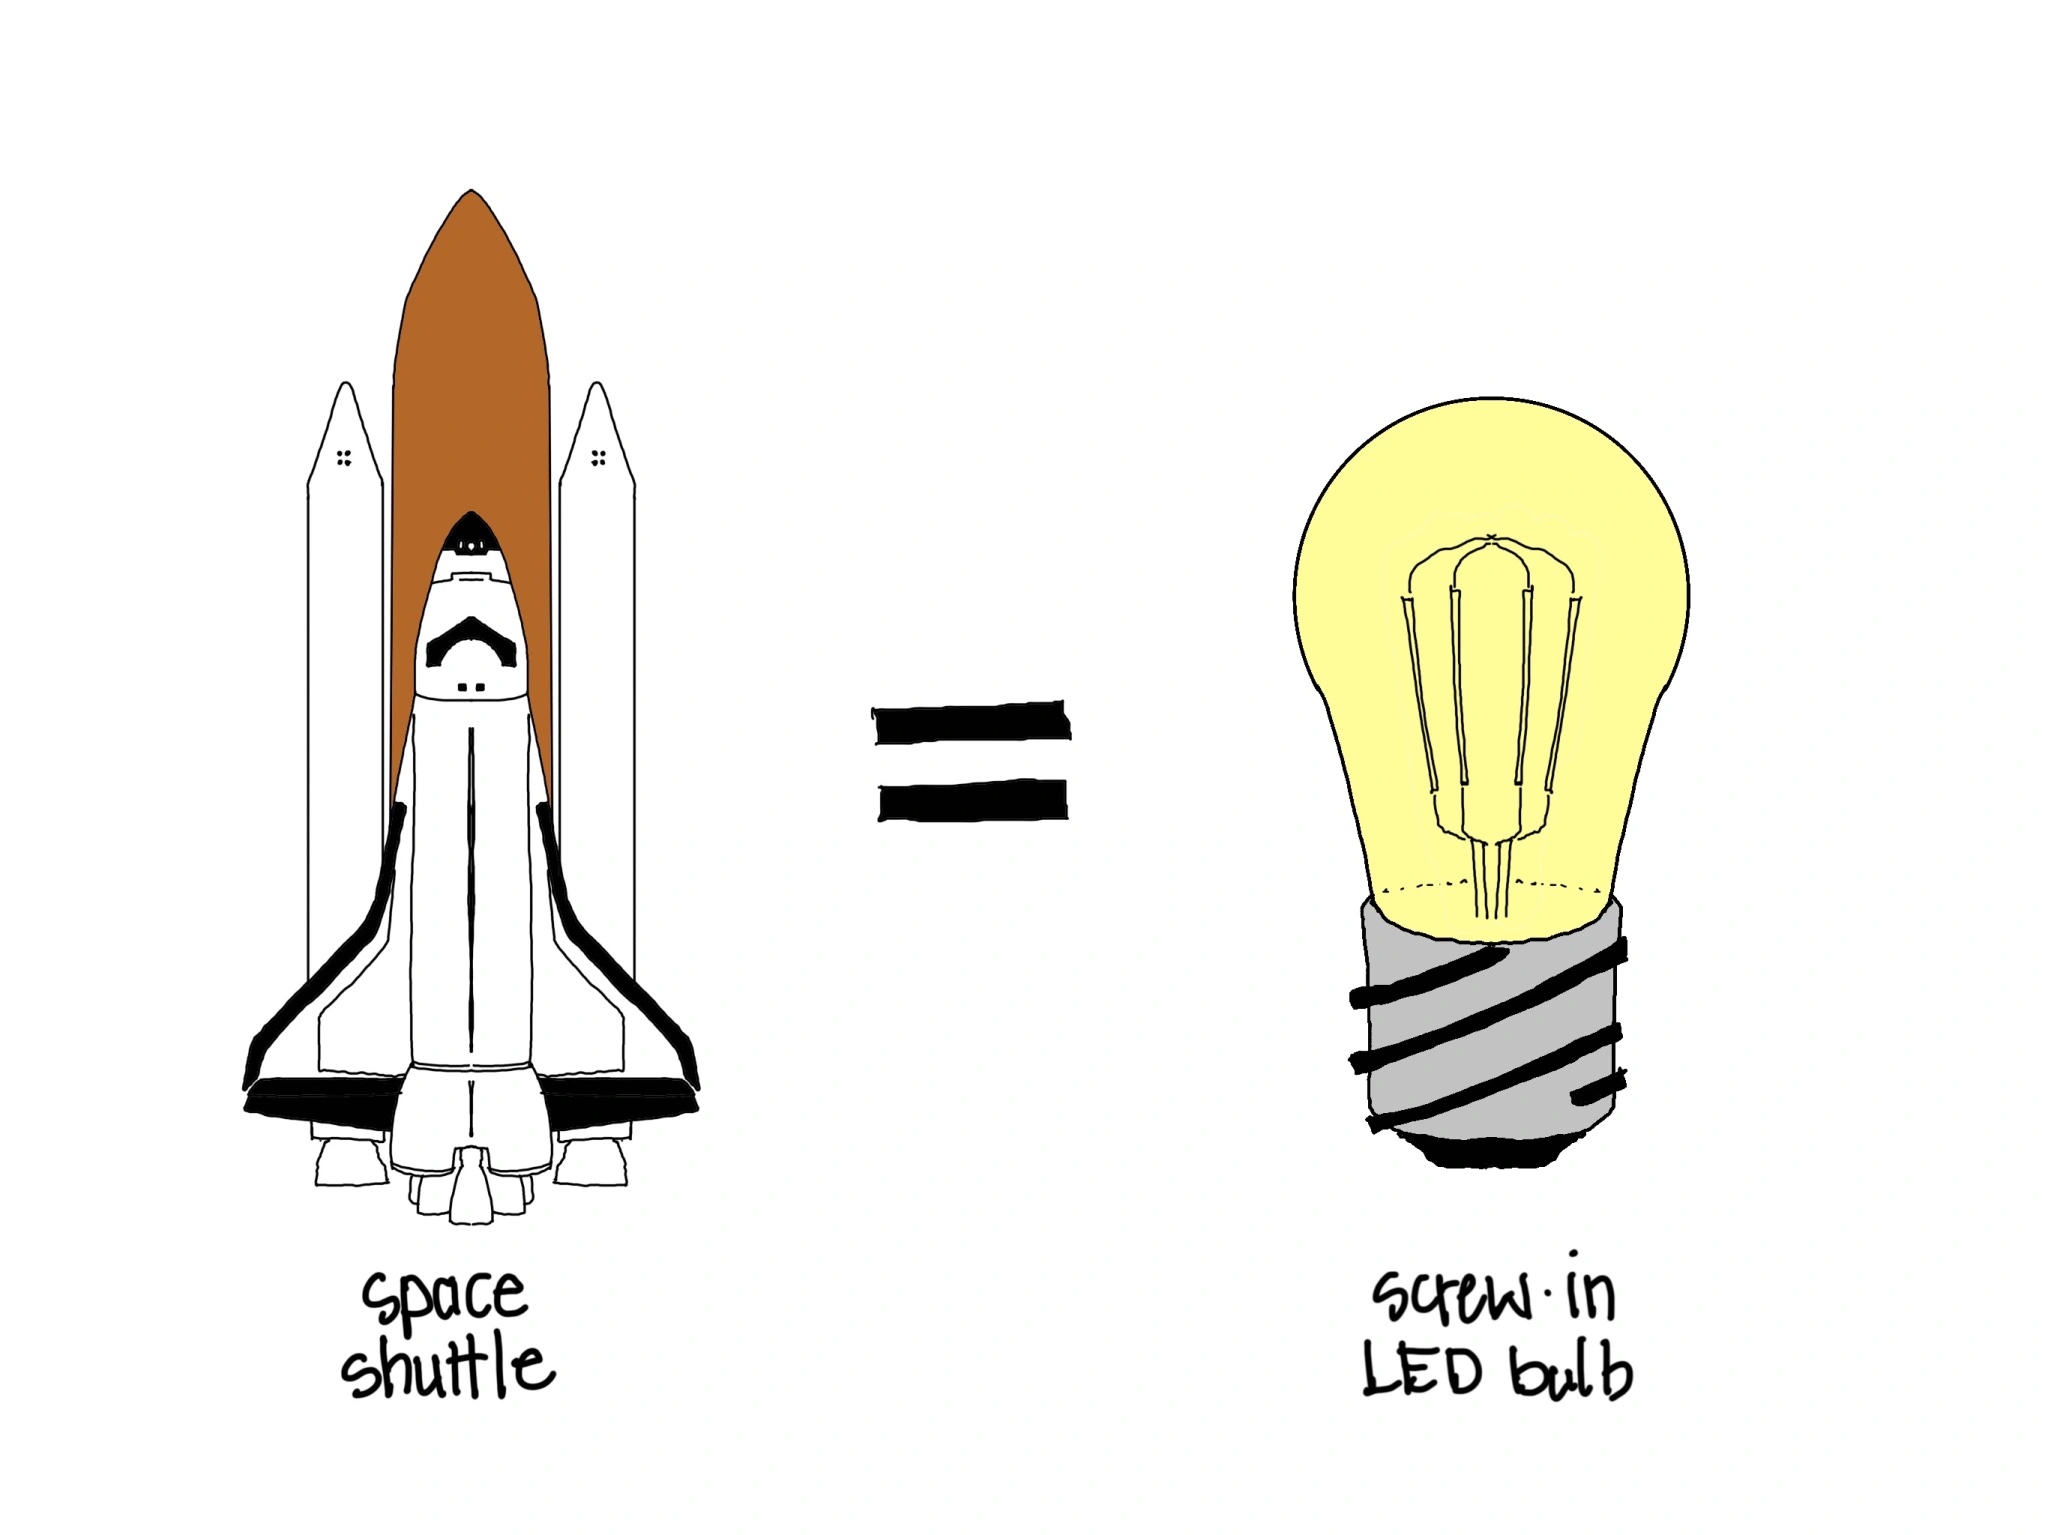 On the left, a NASA space shuttle attached to the rocket boosters. On the right, a screw-in LED lightbulb. An equal sign between them. A NASA Space Shutttle equals an LED Lightbulb